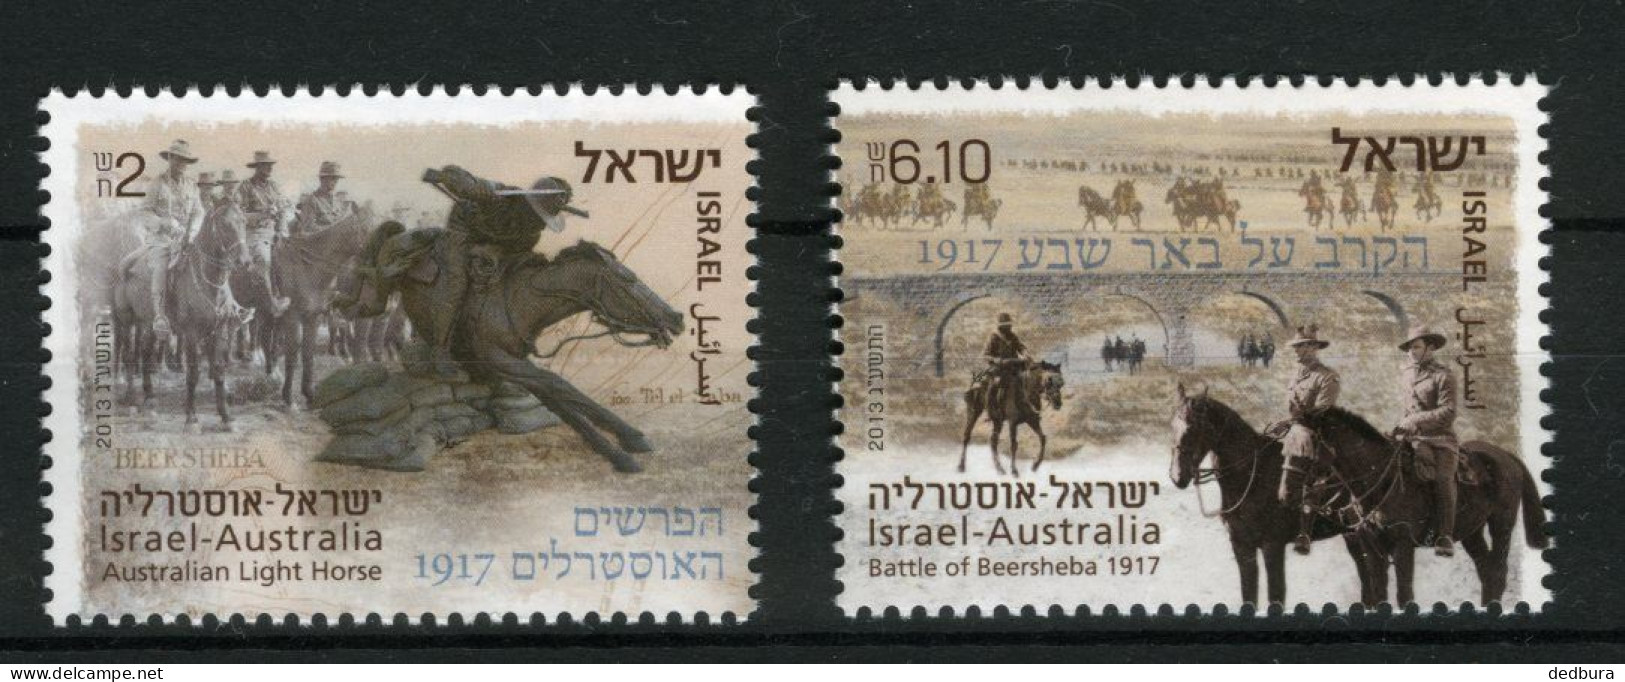 Australia-Israel Joint Issue 2013 - Battle Of Beersheba, 2 Complete Stamp Sets. Israel Stamps Without Tabs - Neufs (sans Tabs)